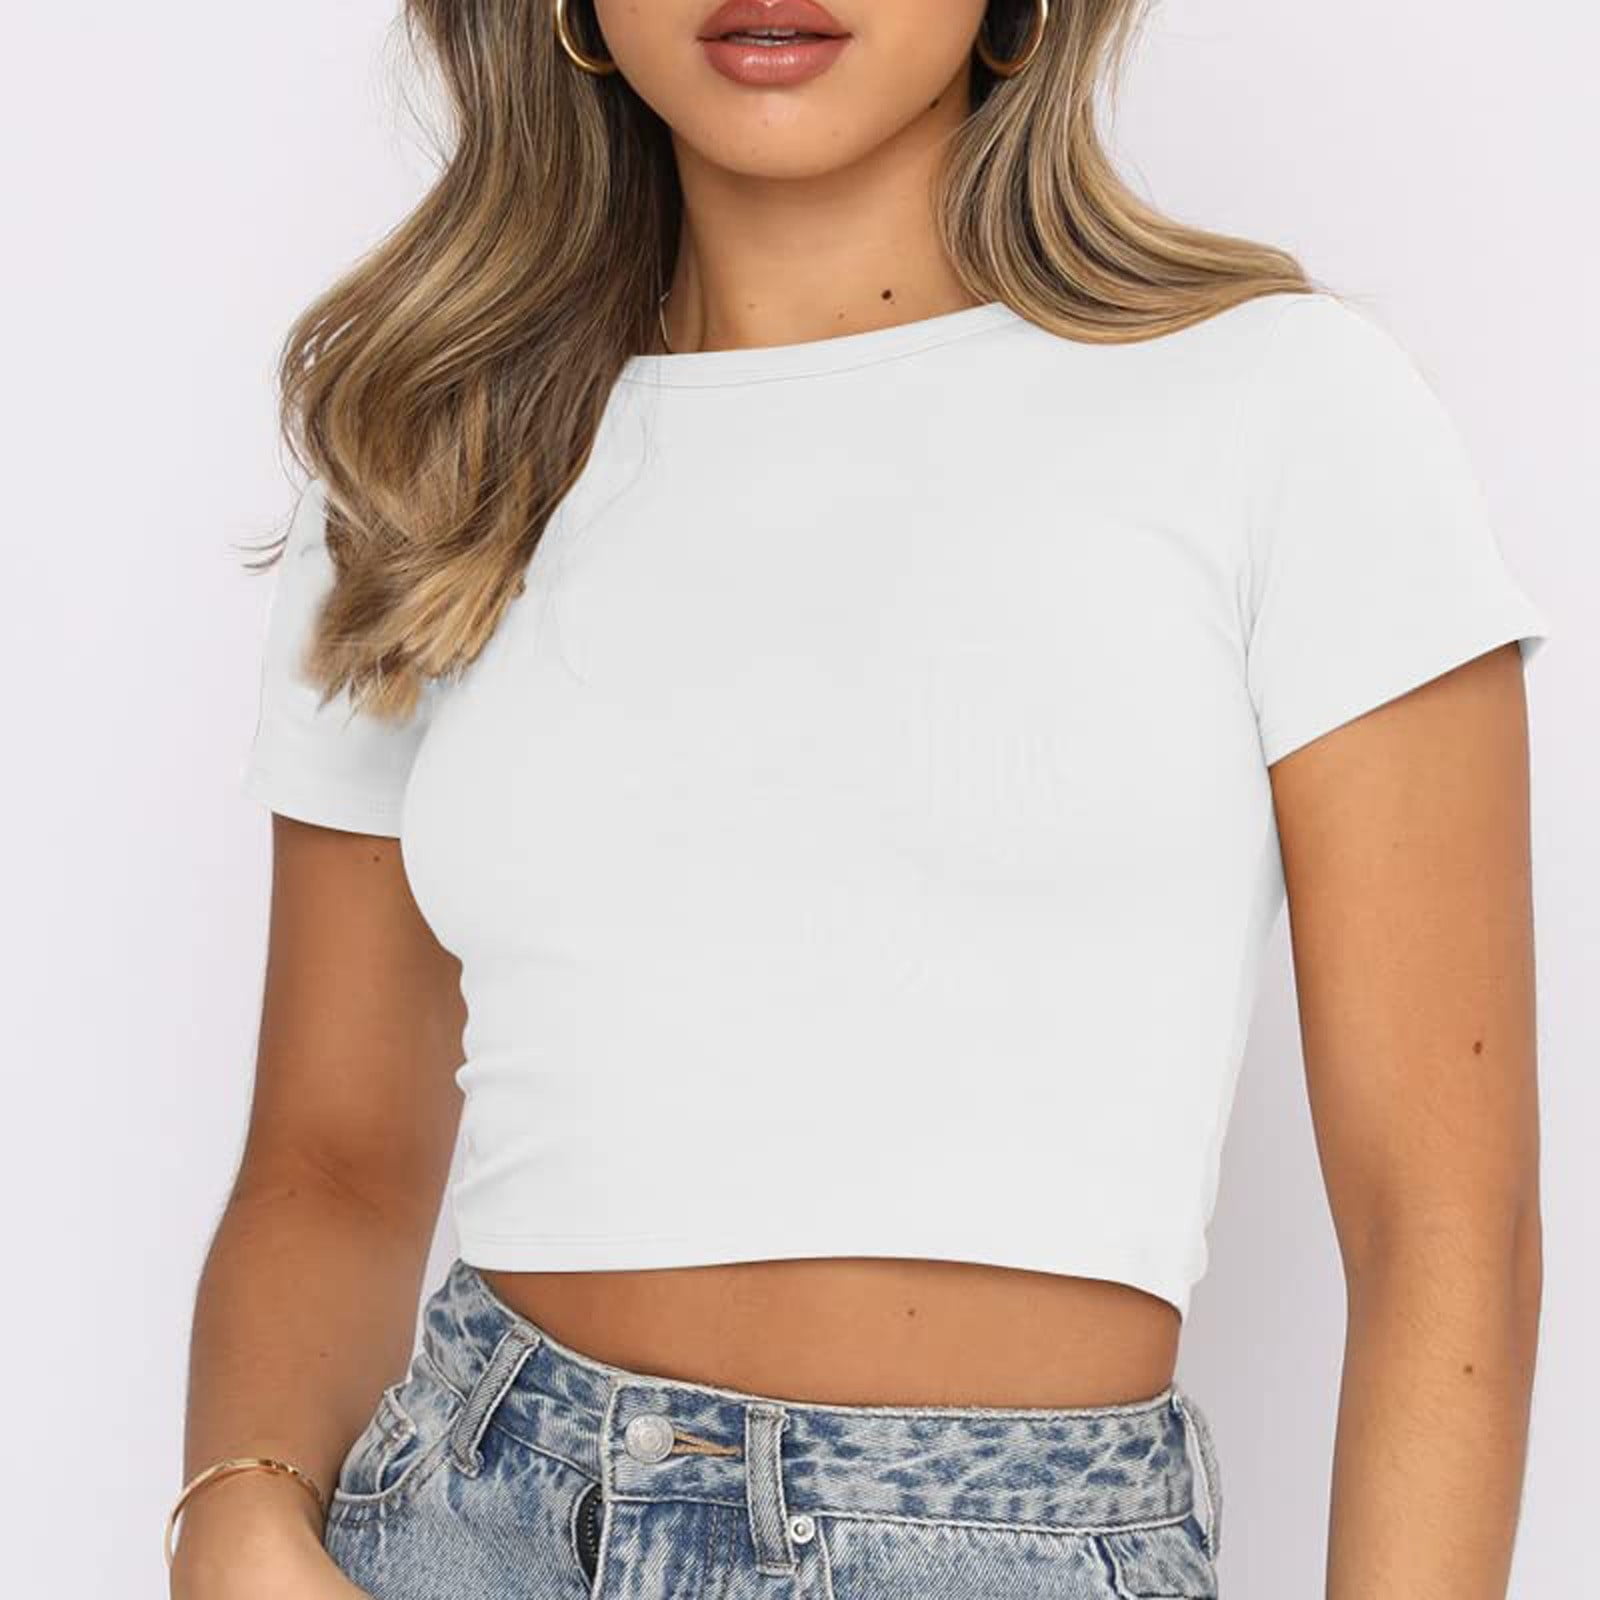 LSLJS Women's Casual Round Neck Short Sleeve Crop Tops Solid Basic T-Shirt  on Clearance